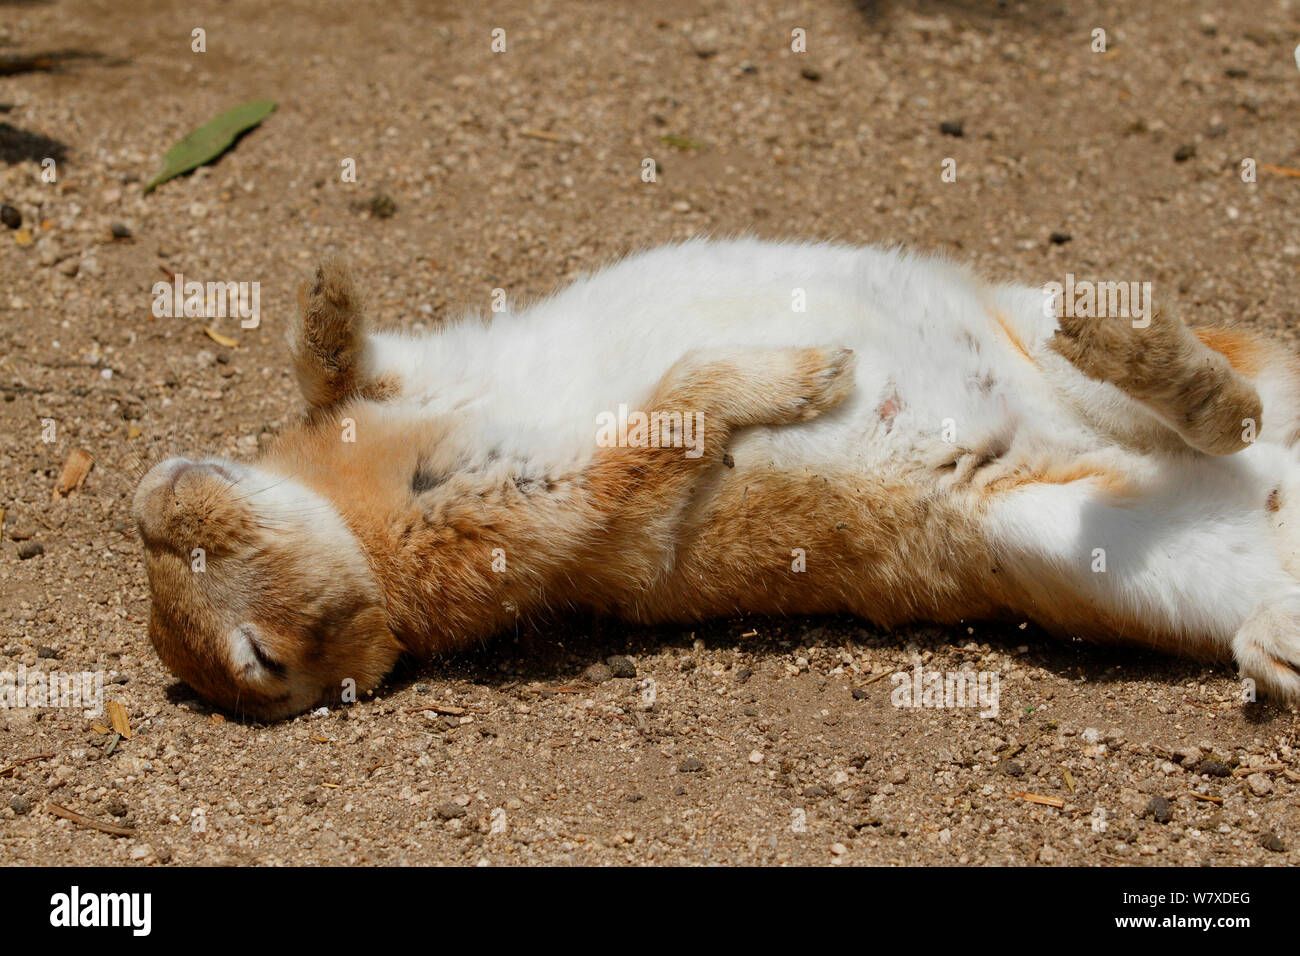 Feral domestic rabbit (Oryctolagus cuniculus) napping on back. This behaviour only occurs when a rabbit feels absolutely safe. Okunojima Island, also known as Rabbit Island, Hiroshima, Japan. Stock Photo